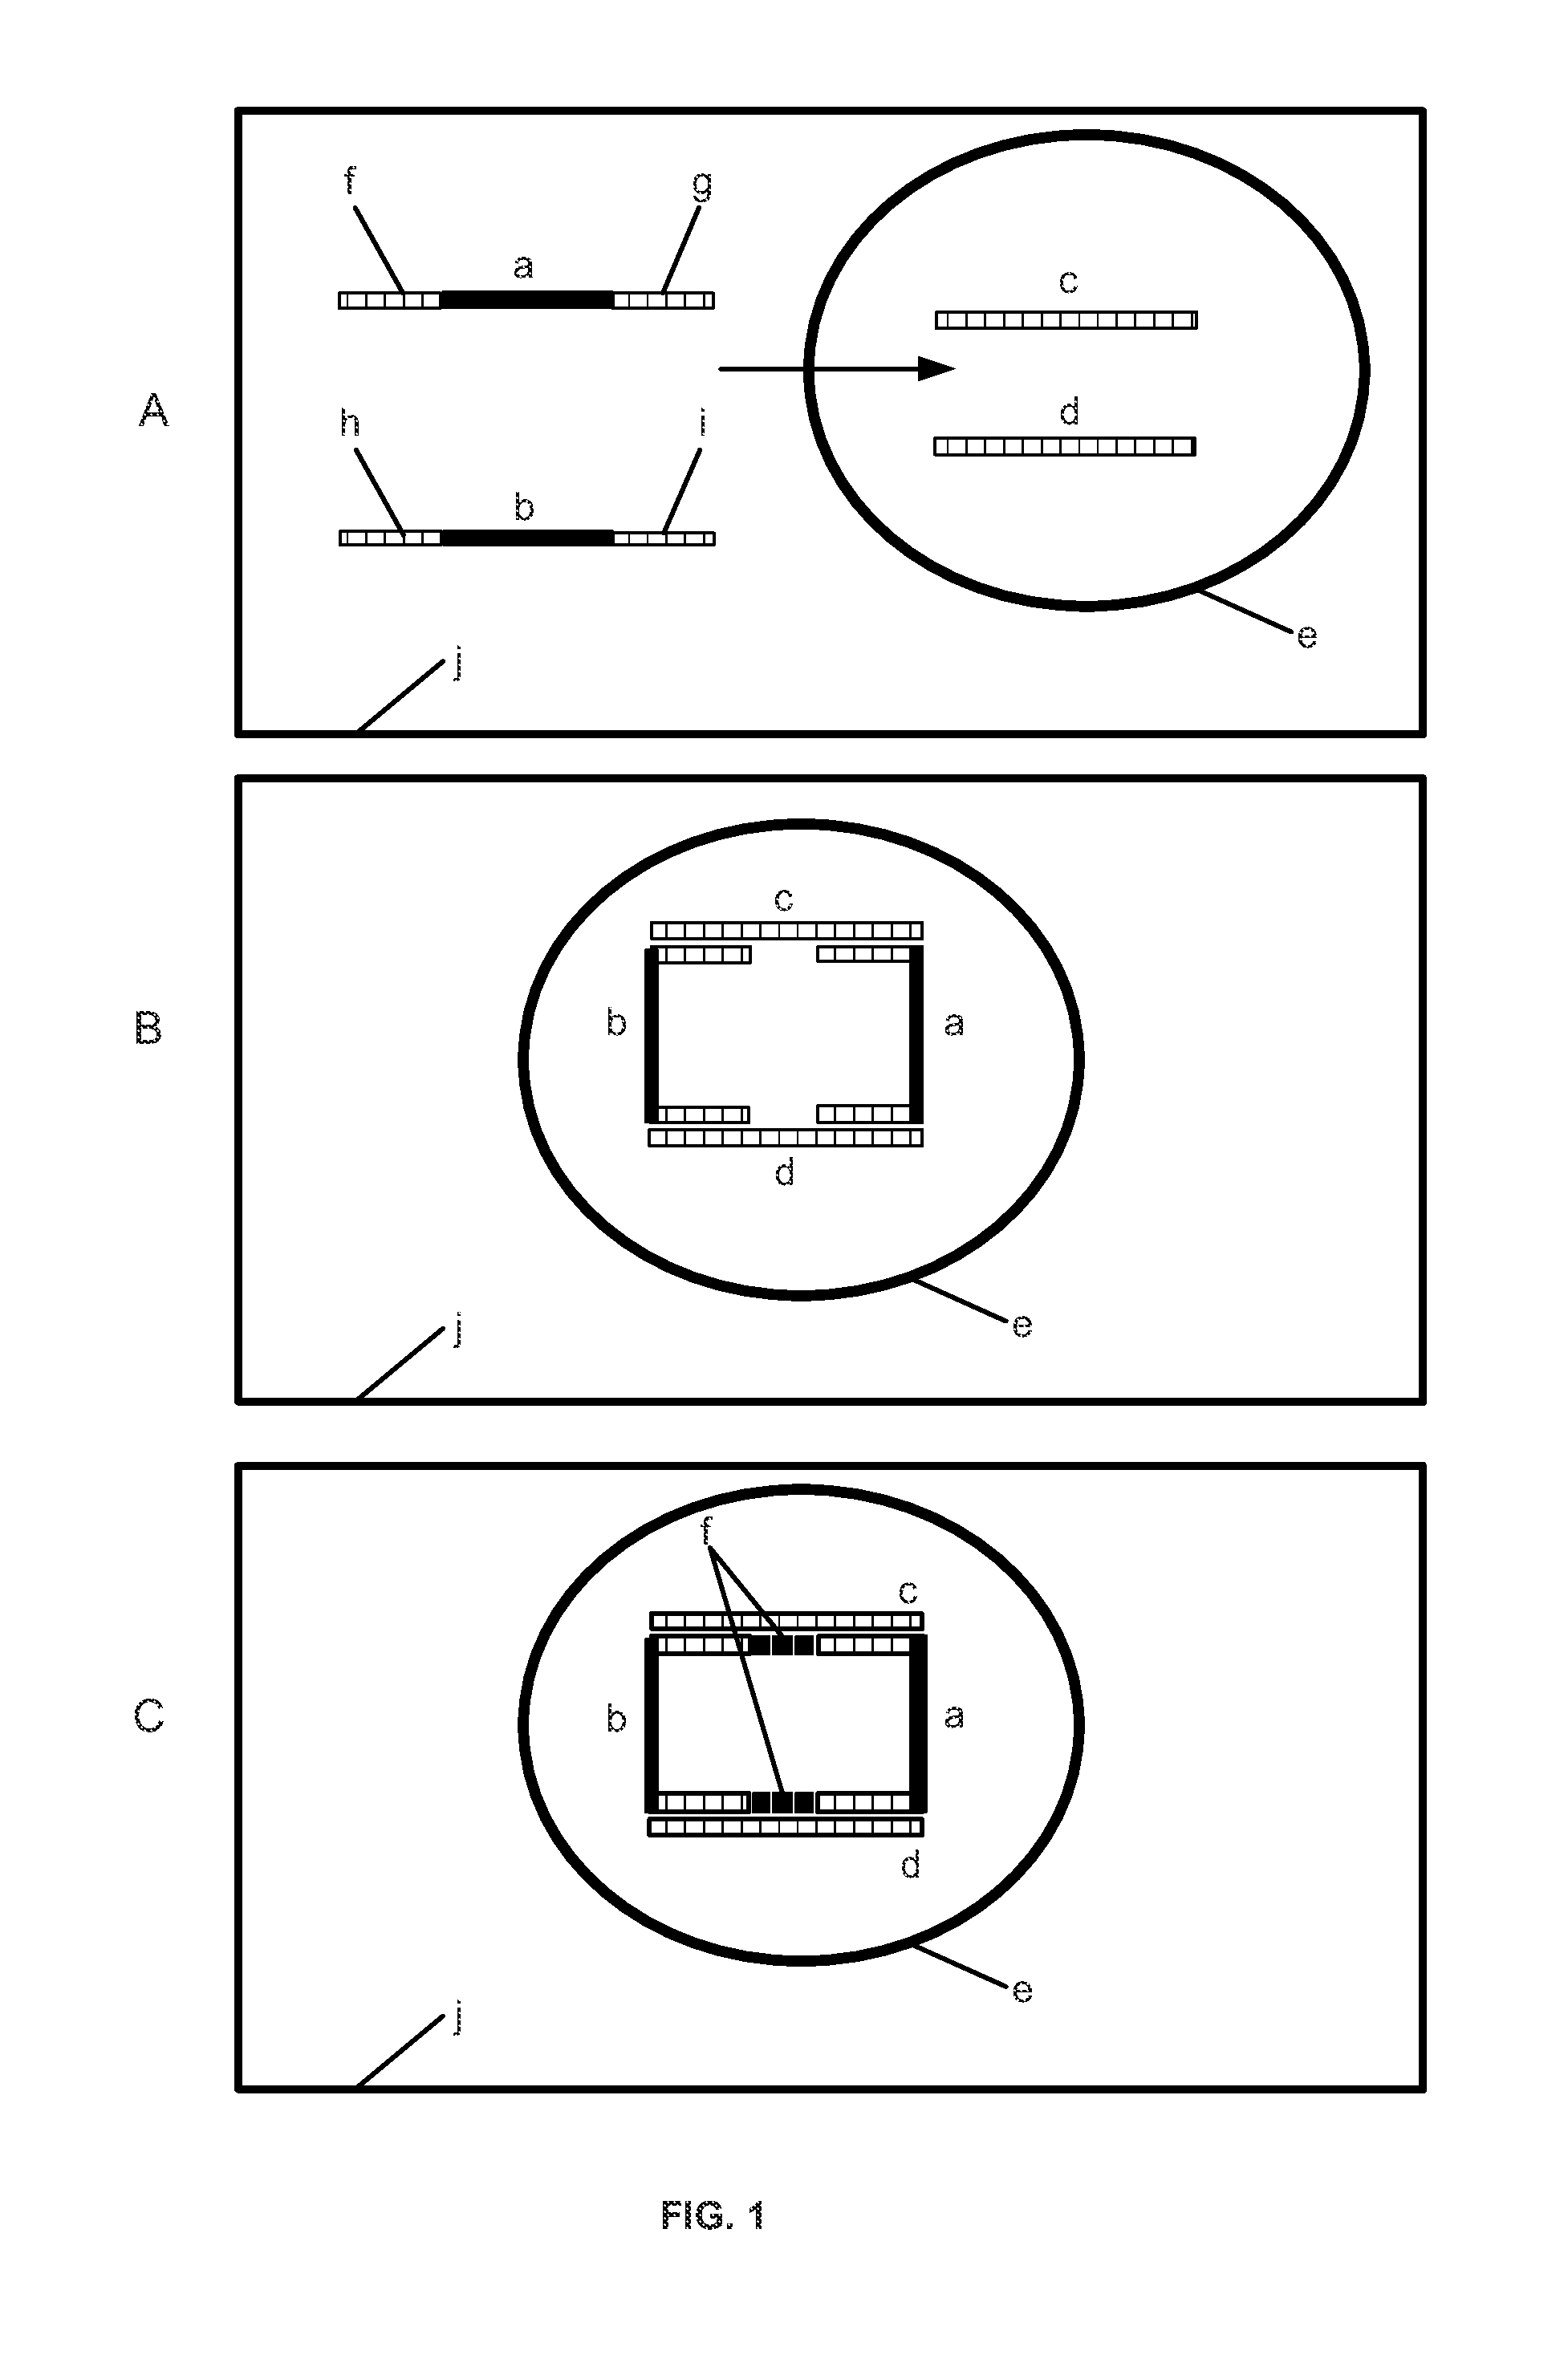 System and Methods for Genetic Analysis of Mixed Cell Populations